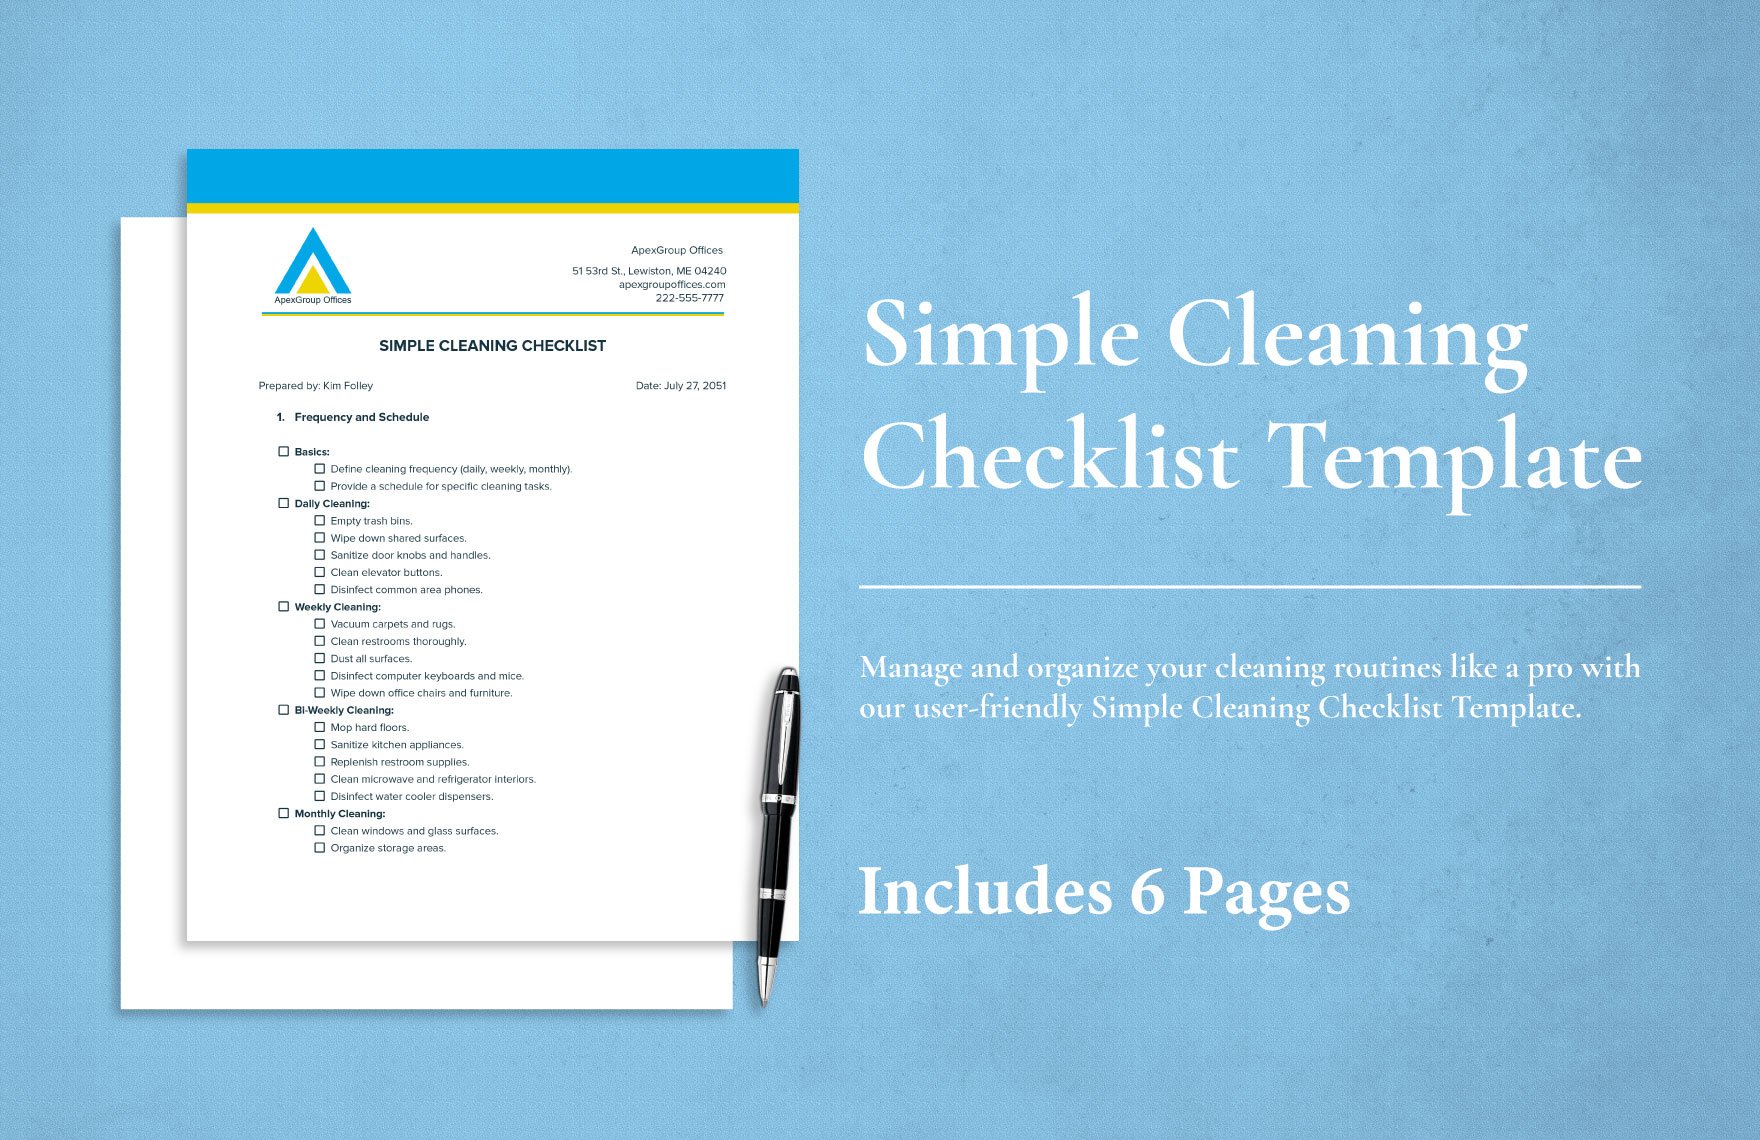 Simple Cleaning Checklist Template